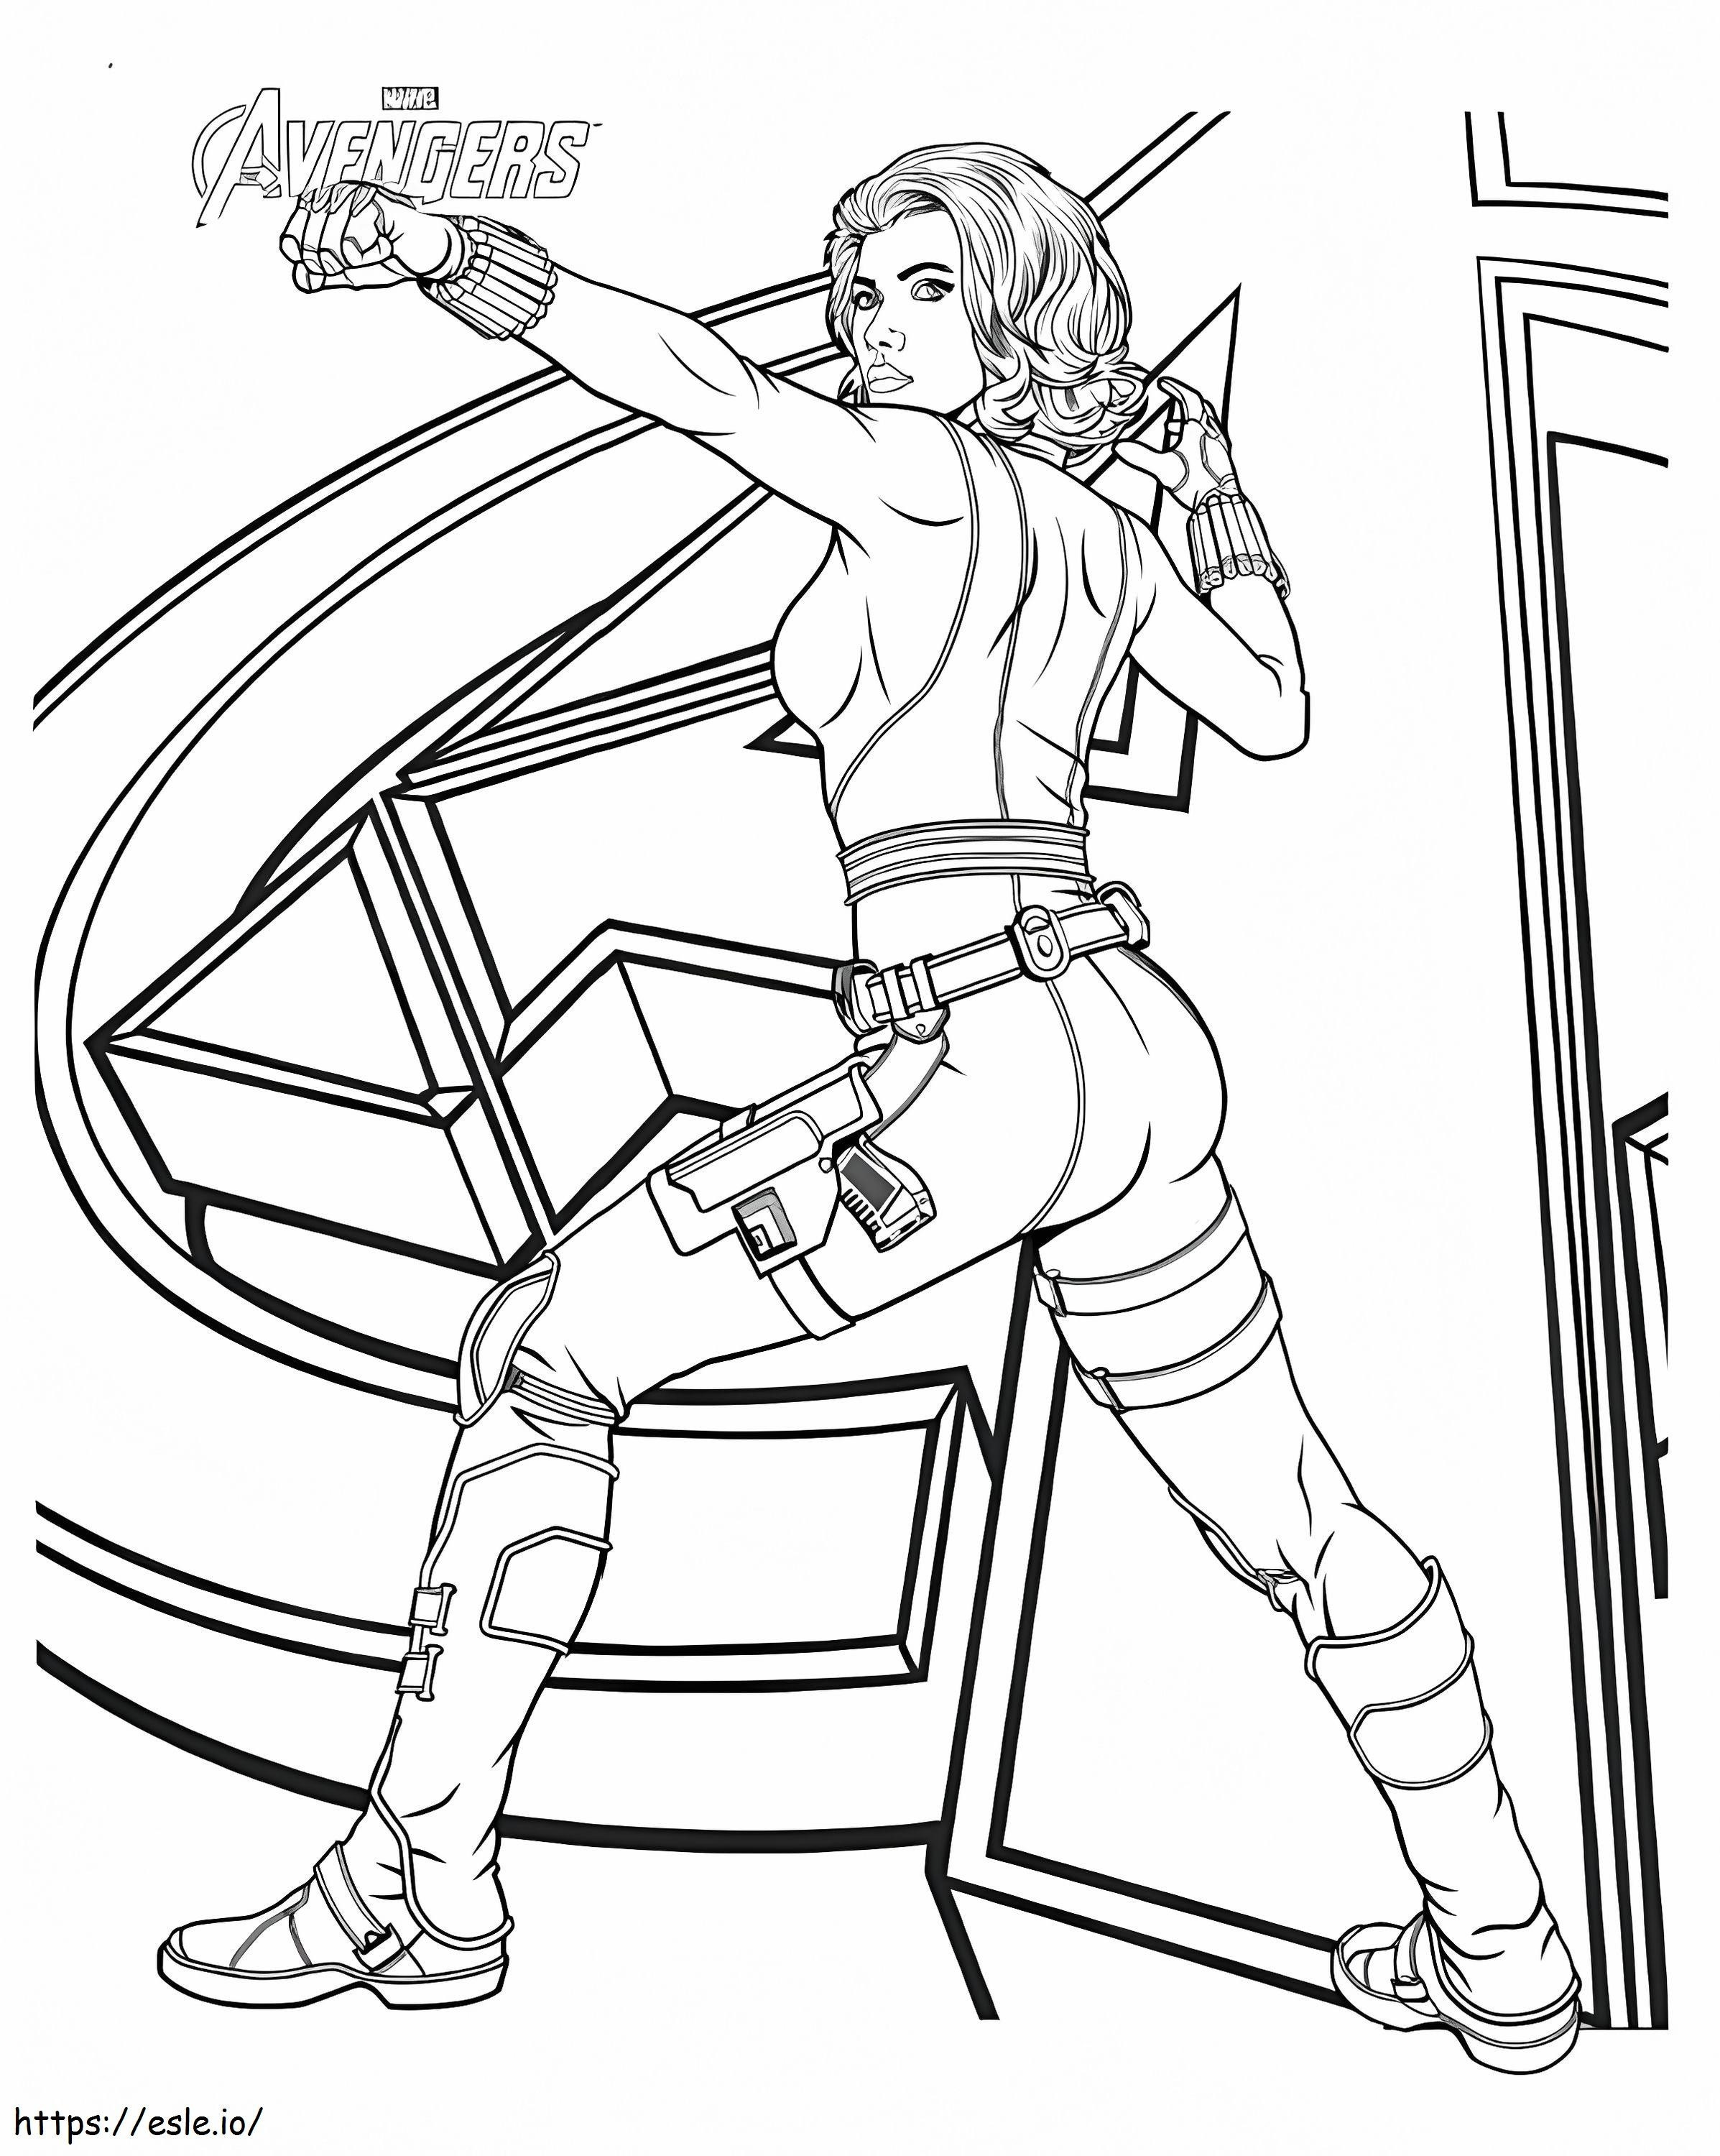 Black Widow Fighting coloring page